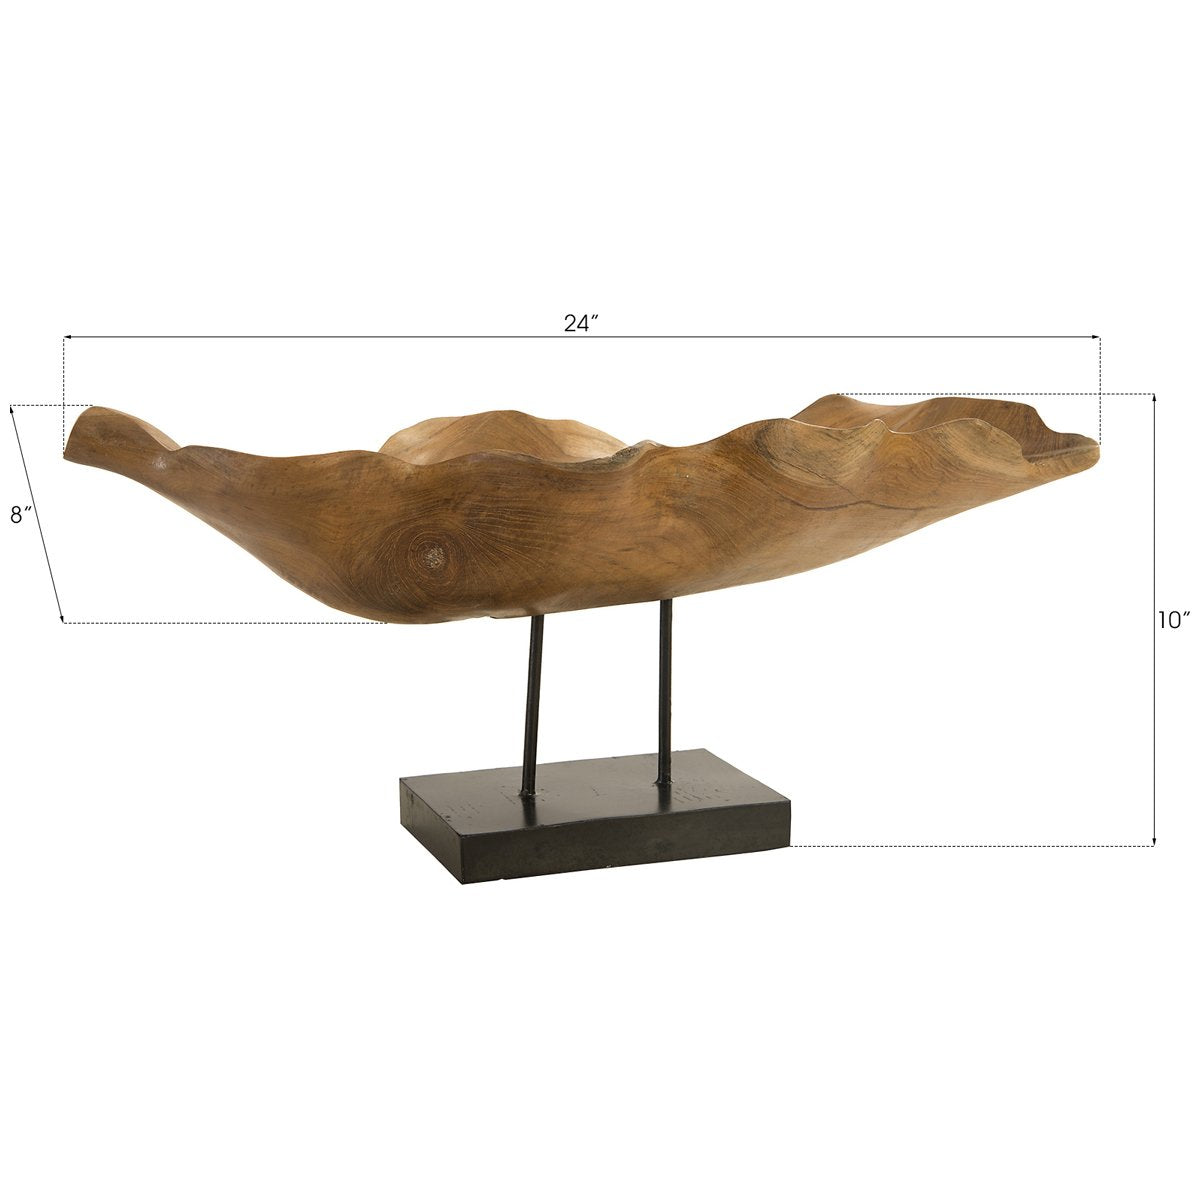 Phillips Collection Carved Leaf Sculpture on Stand